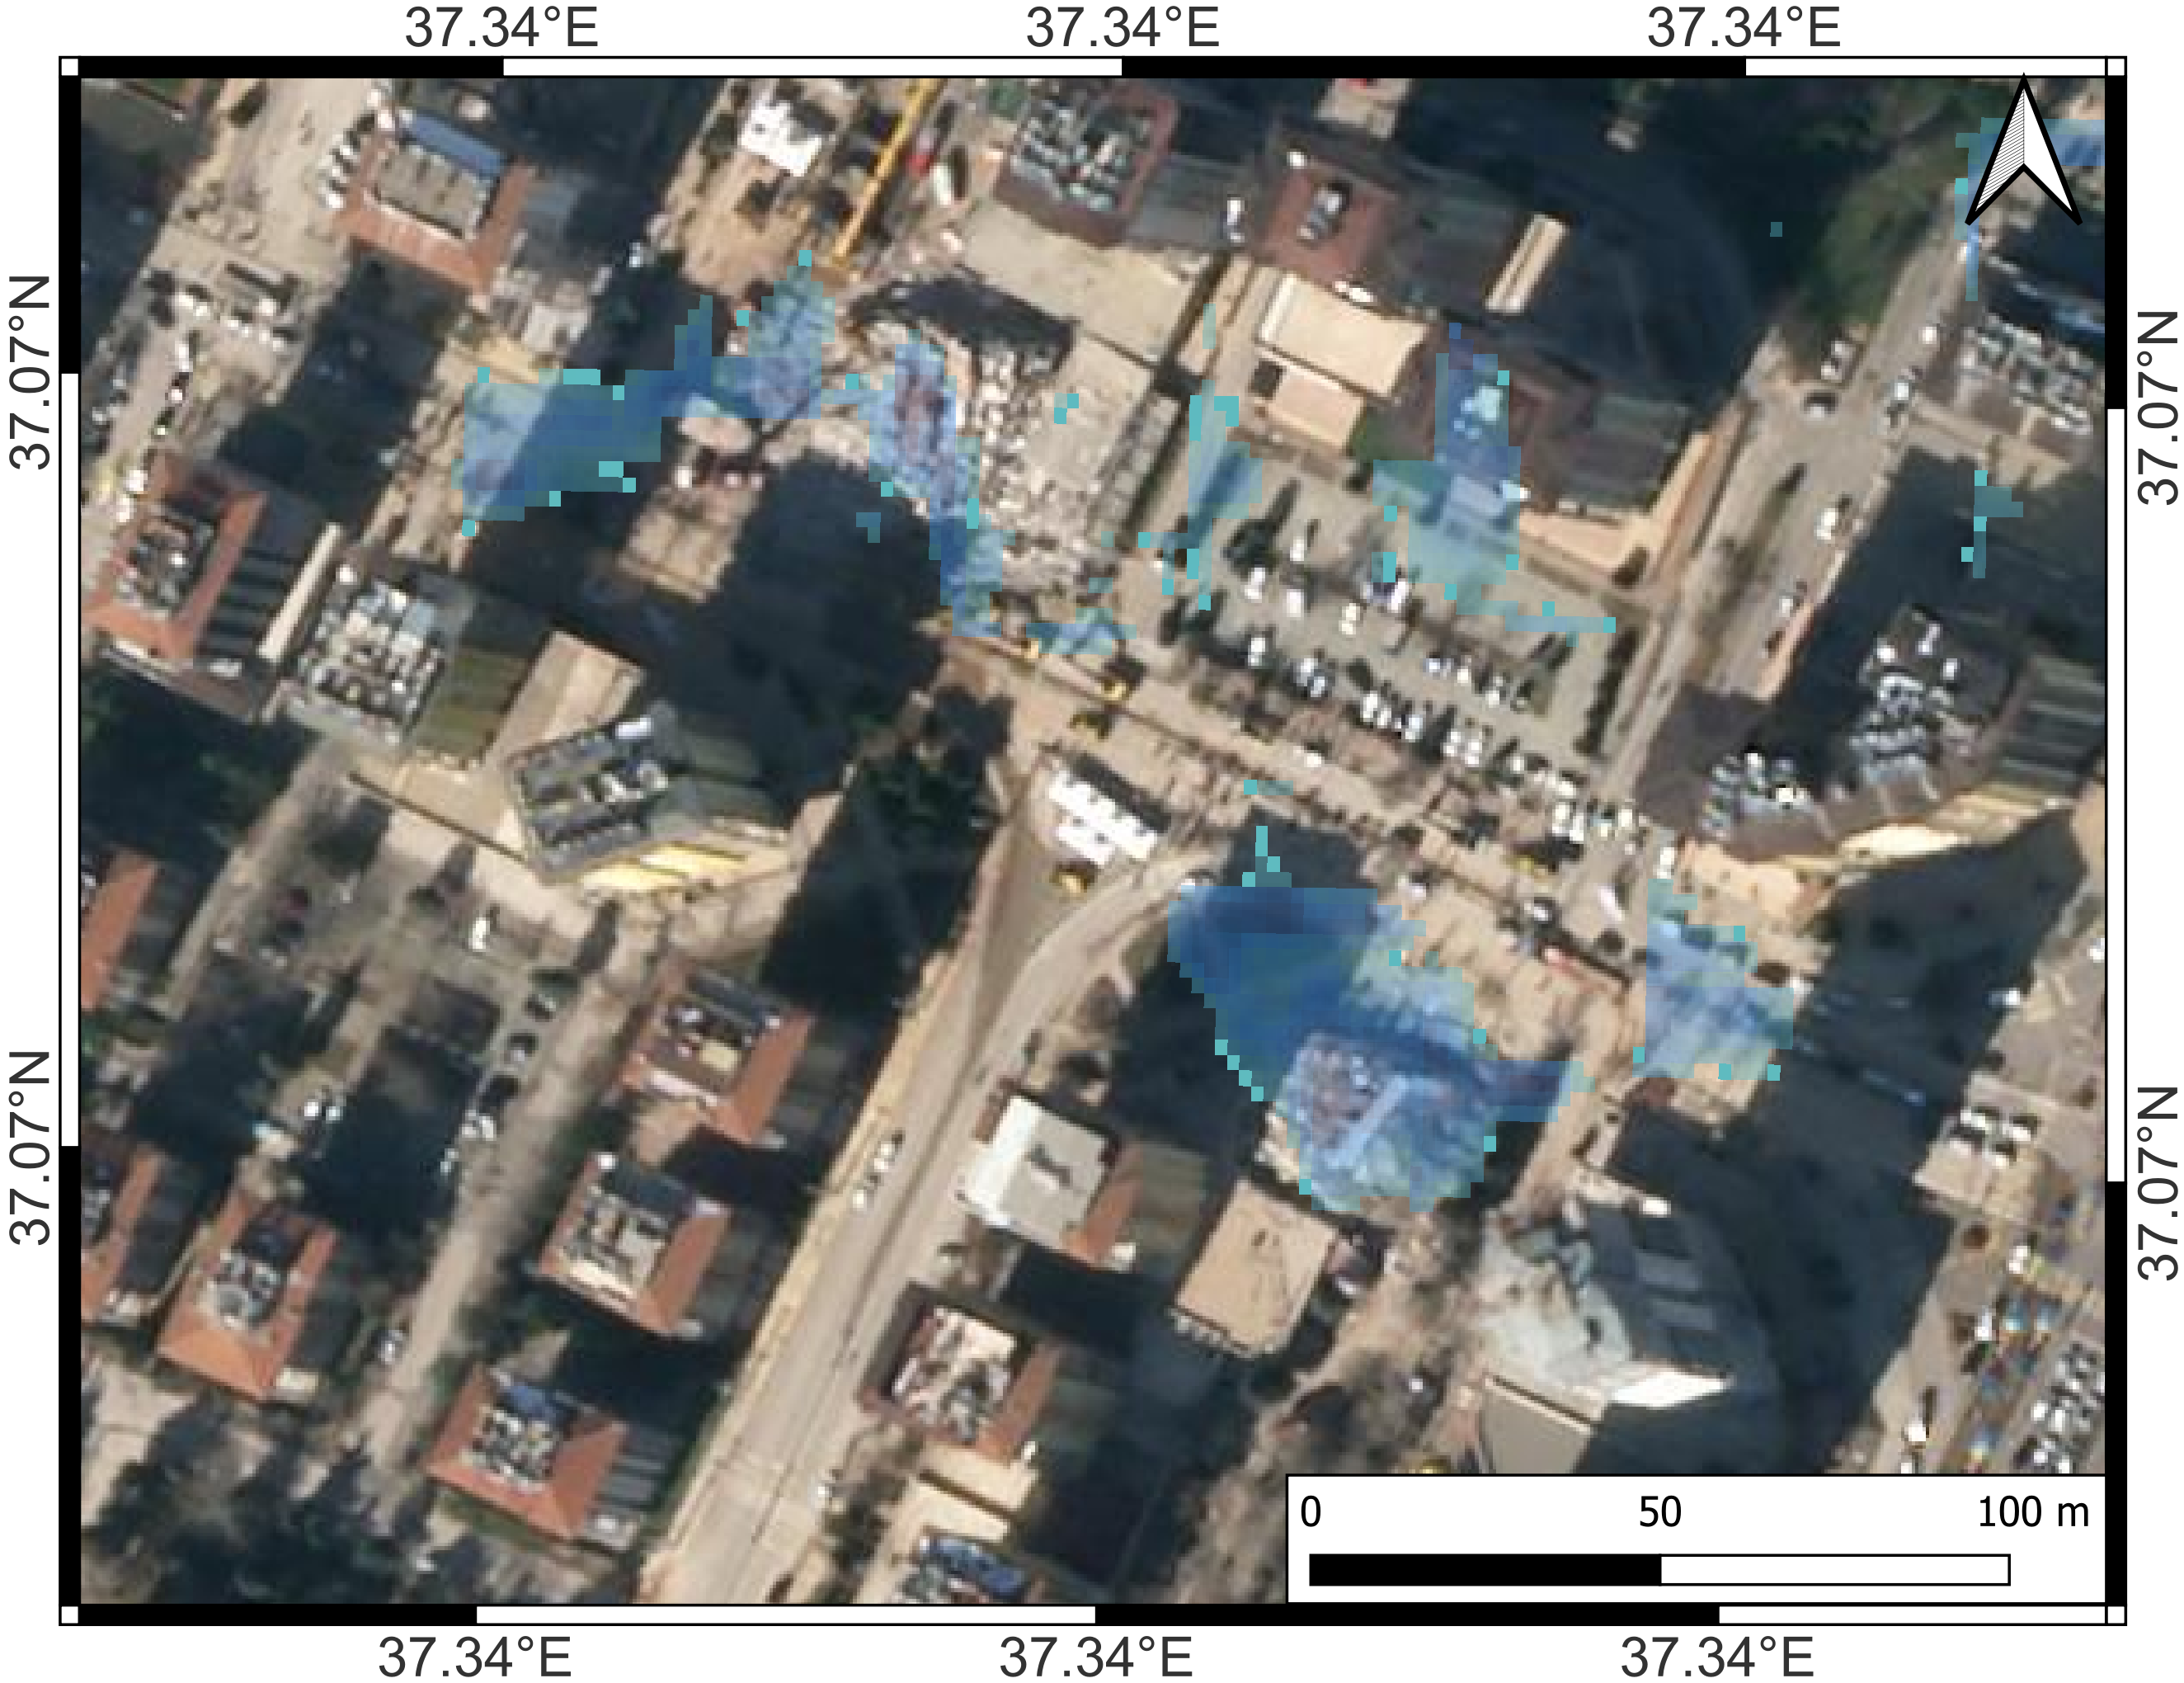 Figure 2. Zoom in on two damaged areas in Gaziantep